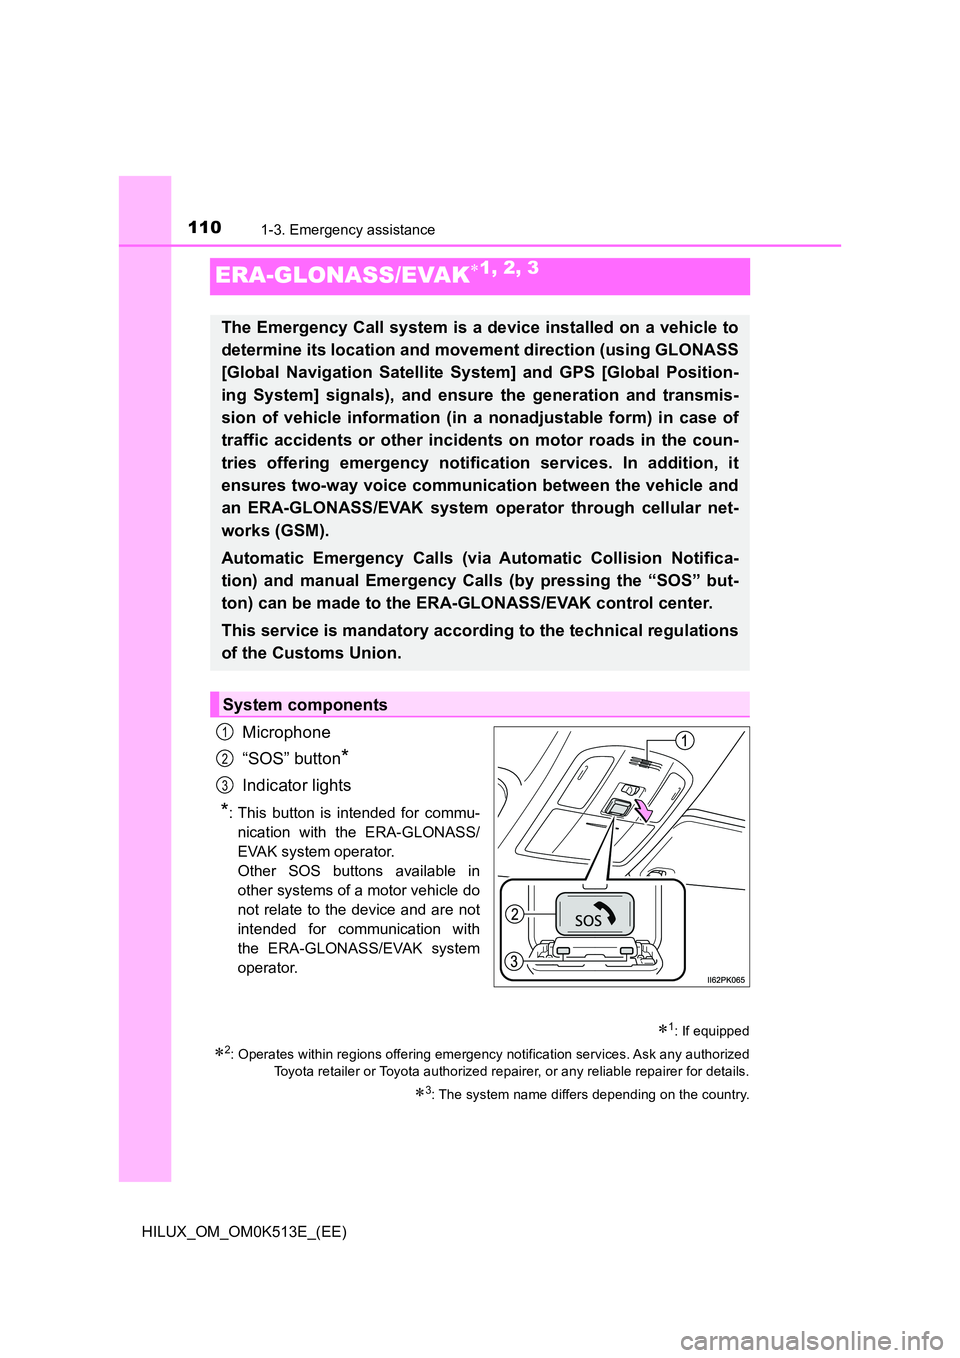 TOYOTA HILUX 2021  Owners Manual (in English) 1101-3. Emergency assistance
HILUX_OM_OM0K513E_(EE)
ERA-GLONASS/EVAK1, 2, 3
Microphone 
“SOS” button*
Indicator lights
*: This button is intended for commu- 
nication with the ERA-GLONASS/
EVAK